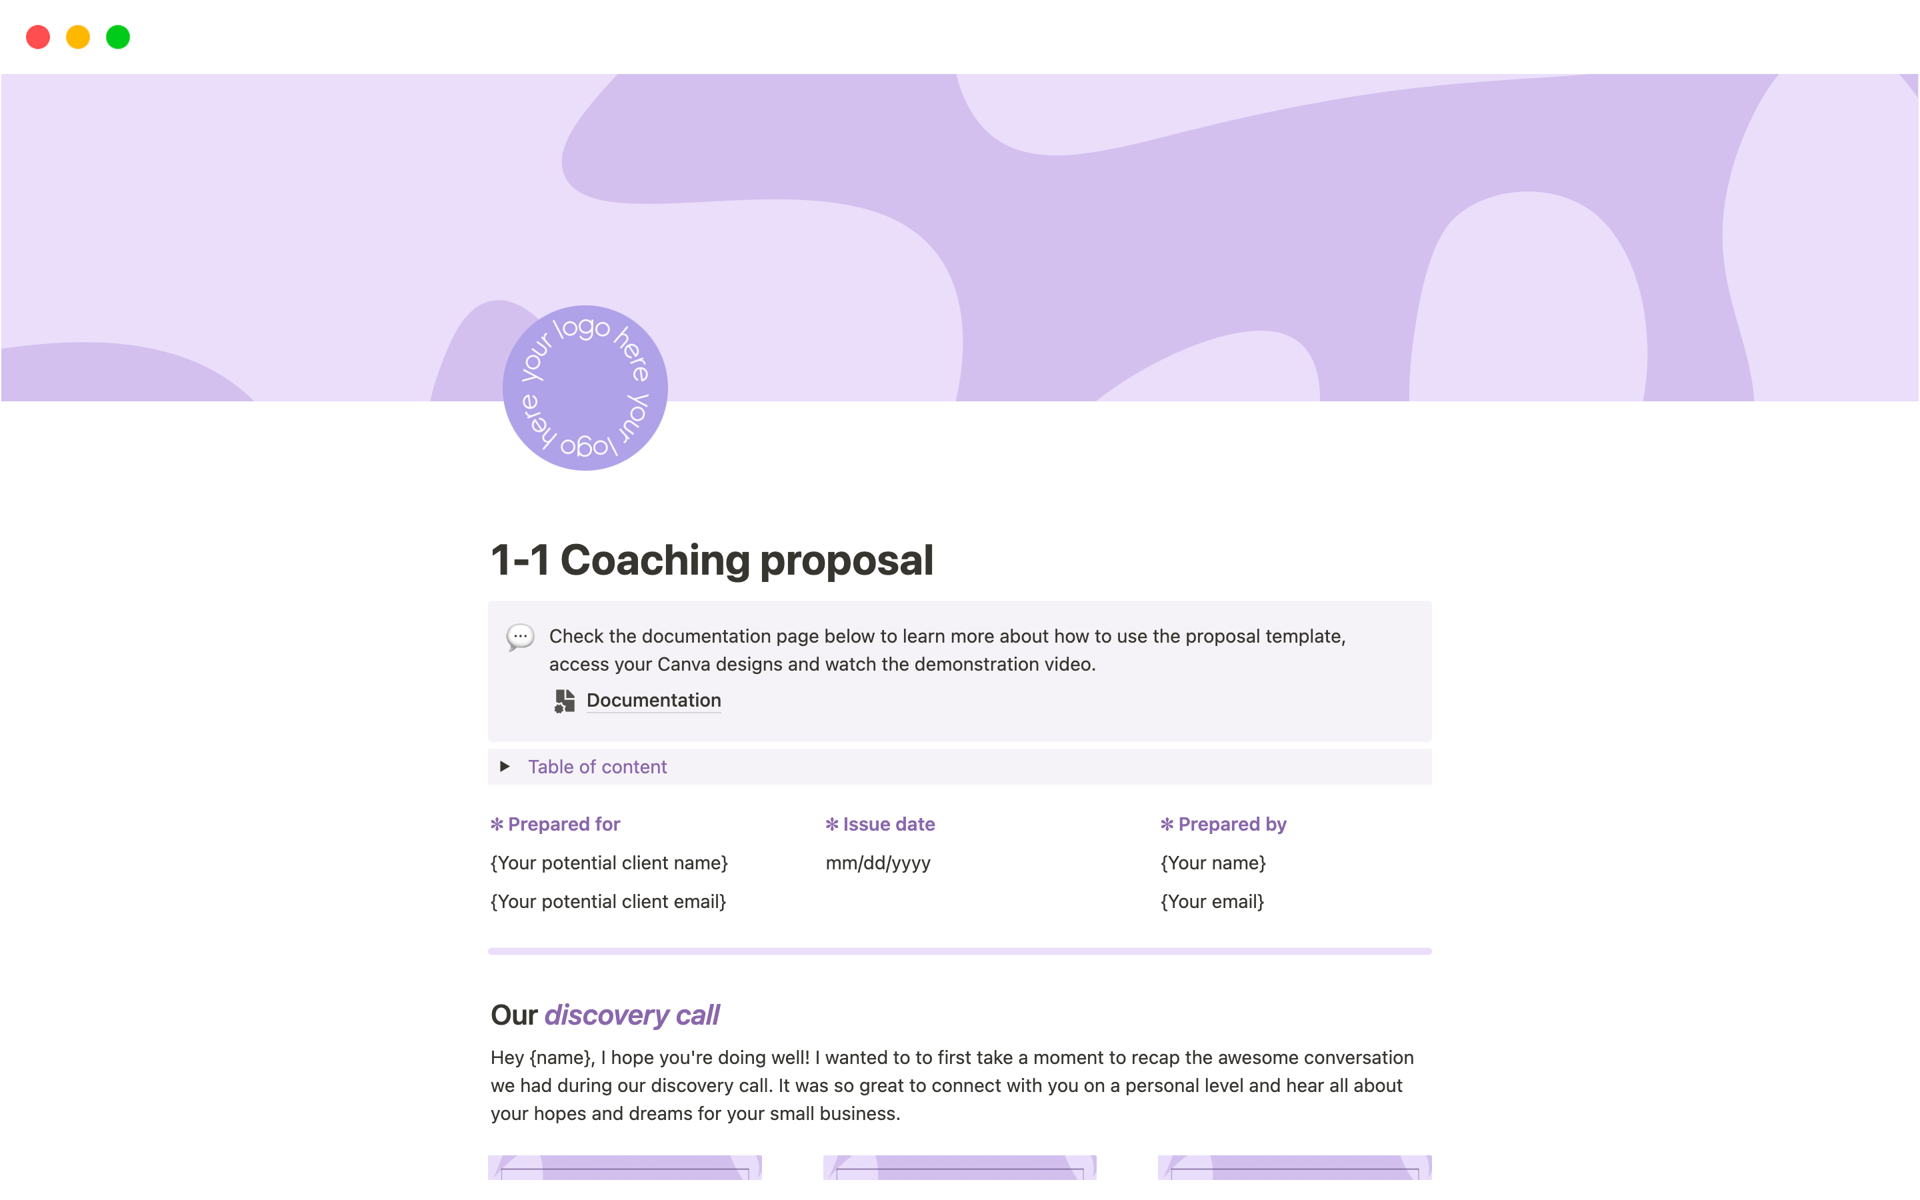 This 1-1 coaching proposal template helps you effortlessly create proposal guides and pitch your coaching program to potential clients